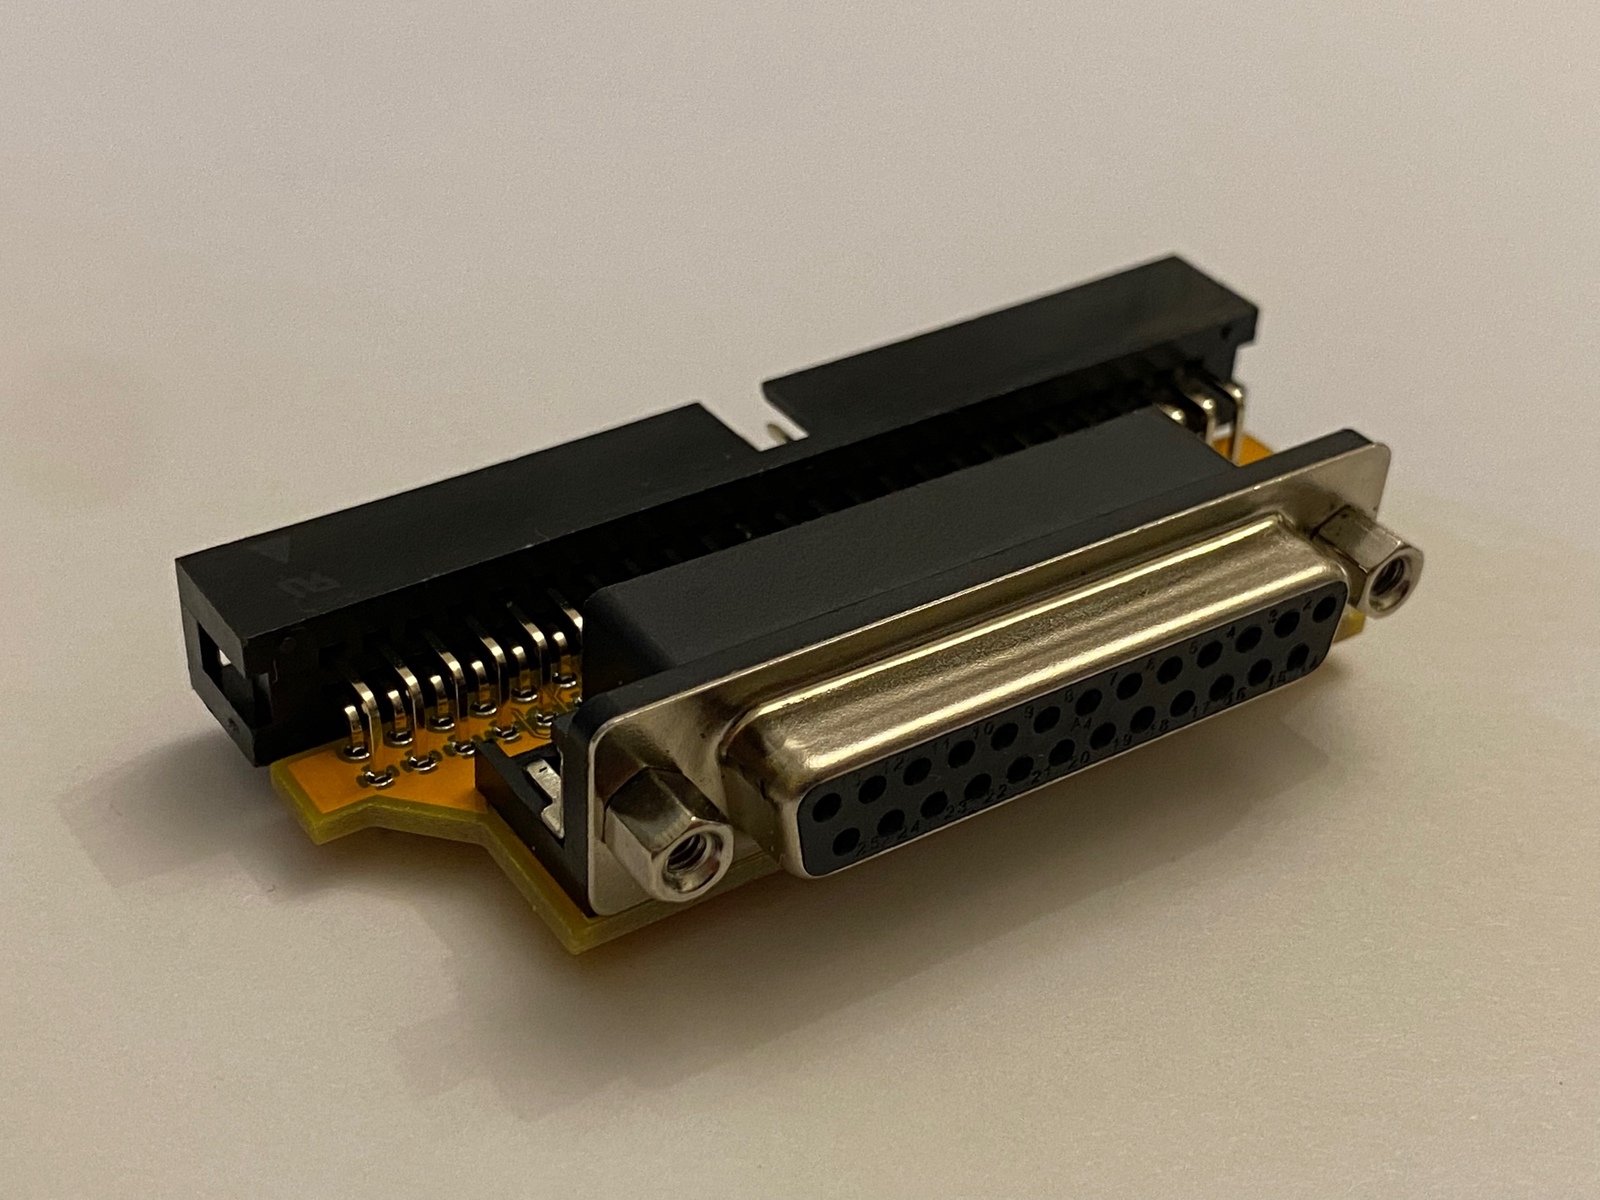 D-SUB DB25 TO 50 PIN MALE SCSI ADAPTER